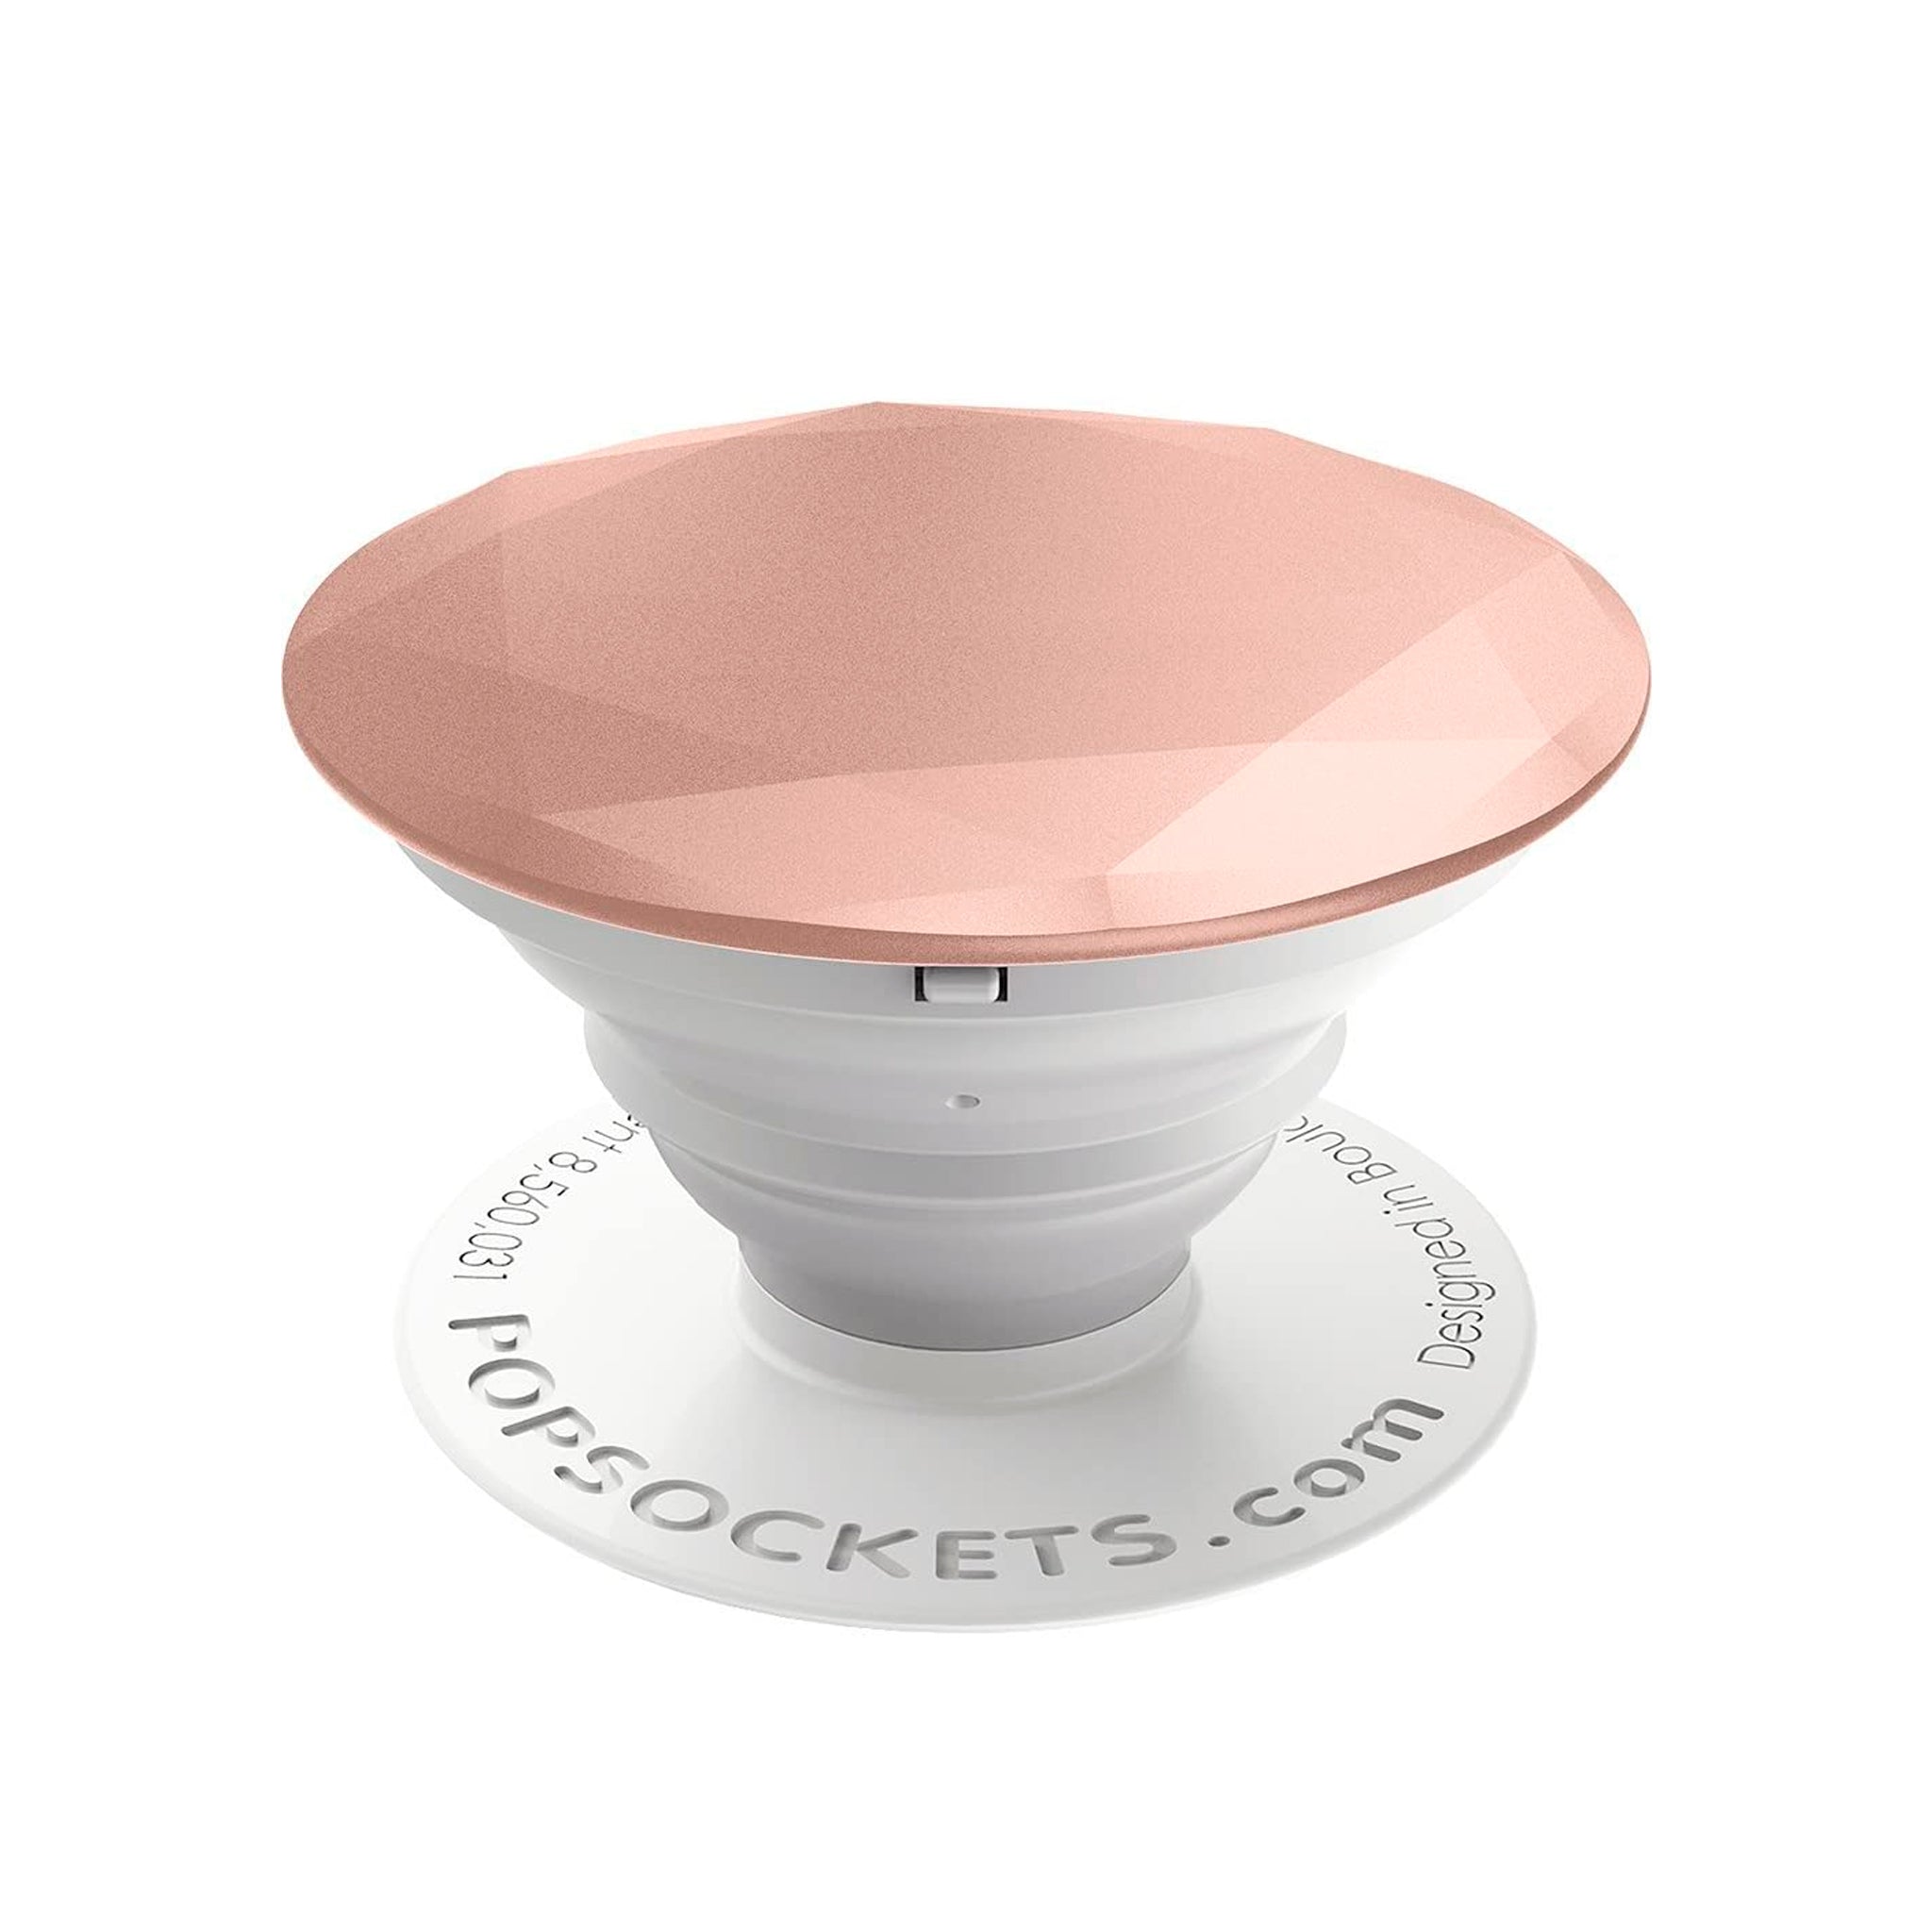 Popsockets - Popgrip Premium Metallic Diamond Swappable Device Stand And Grip -  Rose Gold